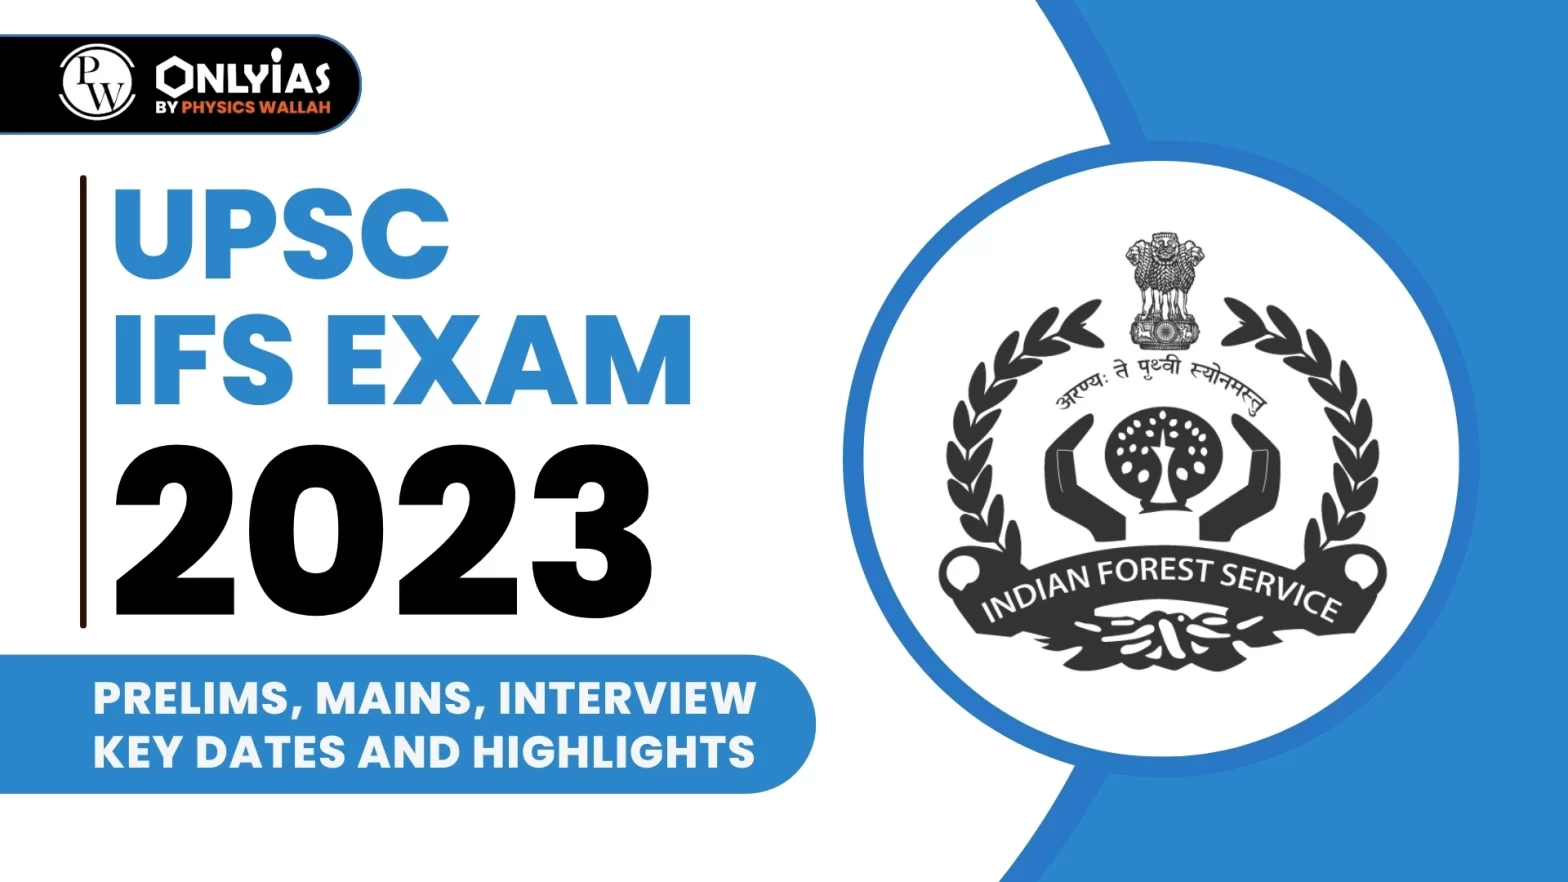 Upsc Ifs Exam 2023 Prelims Mains Interview Key Dates And Highlights Pwonlyias